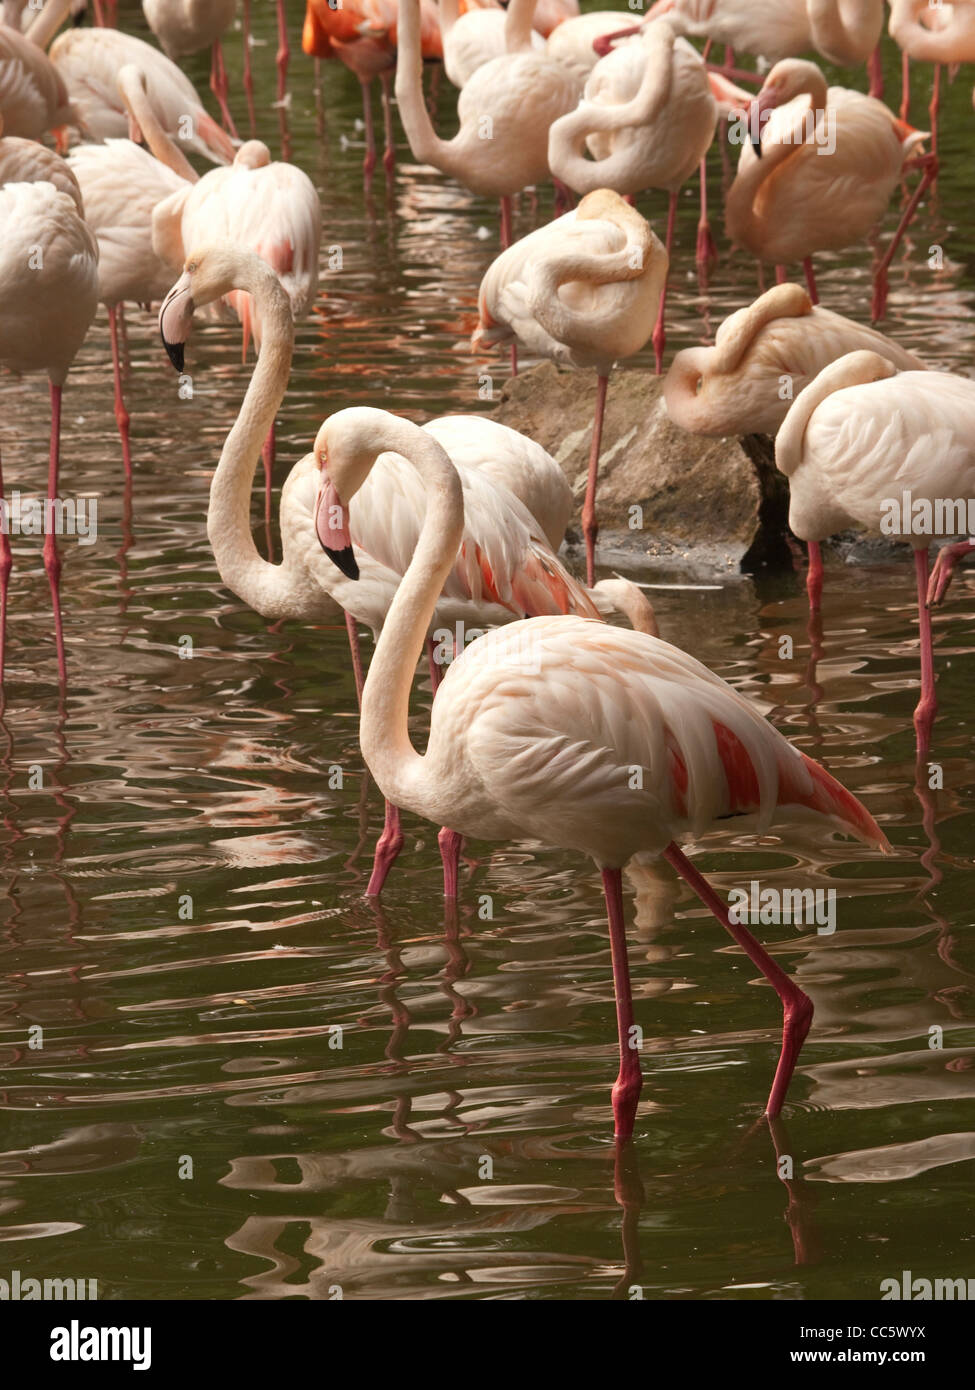 Les flamants, Animal sauvage Zoo, Shenzhen, Guangdong, Chine Banque D'Images